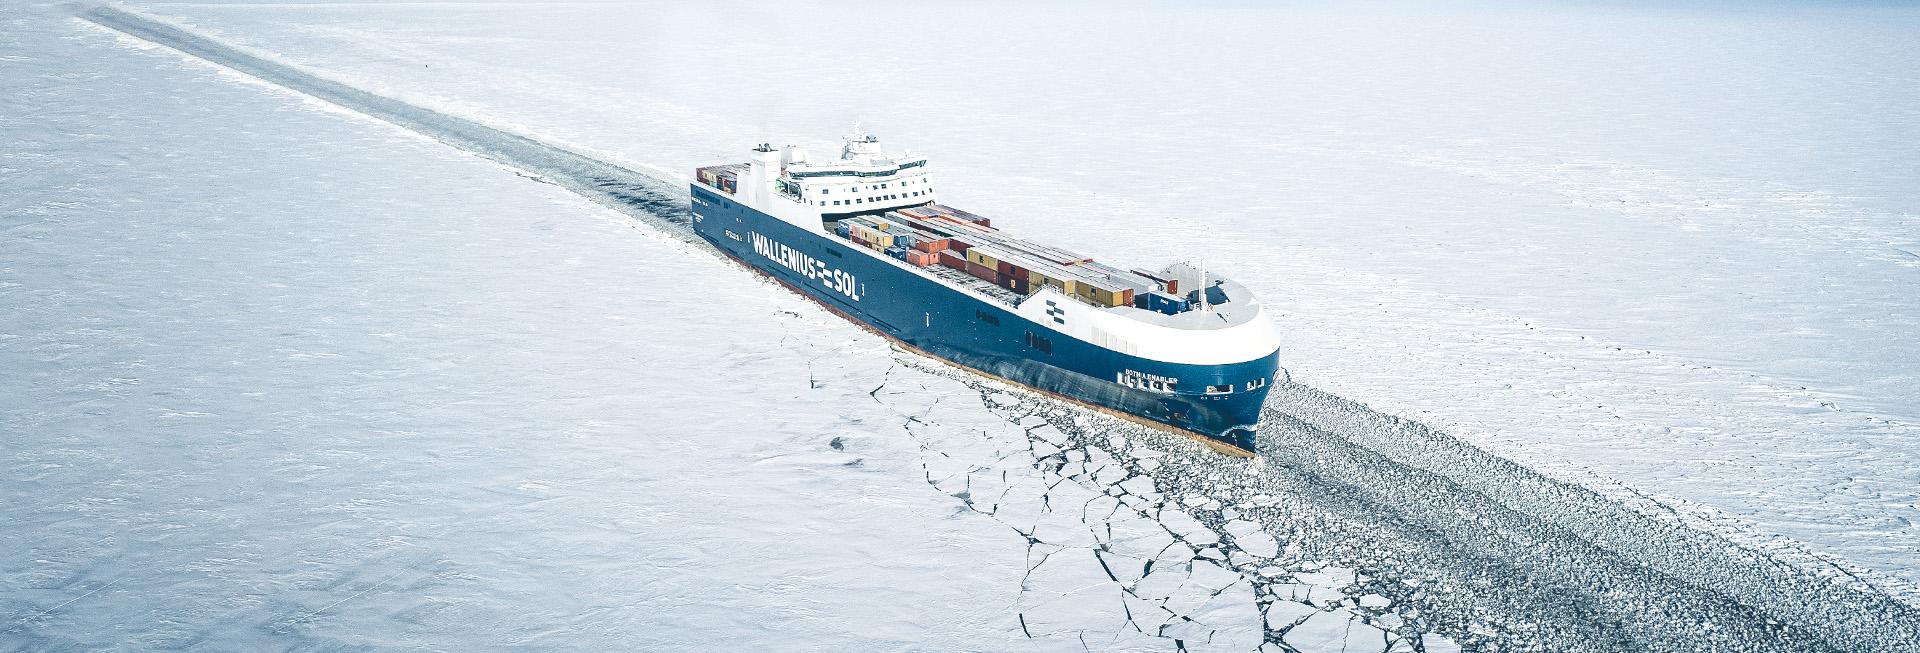 RoRo vessel Botnia Enabler plows through the ice in the Gulf of Bothnia